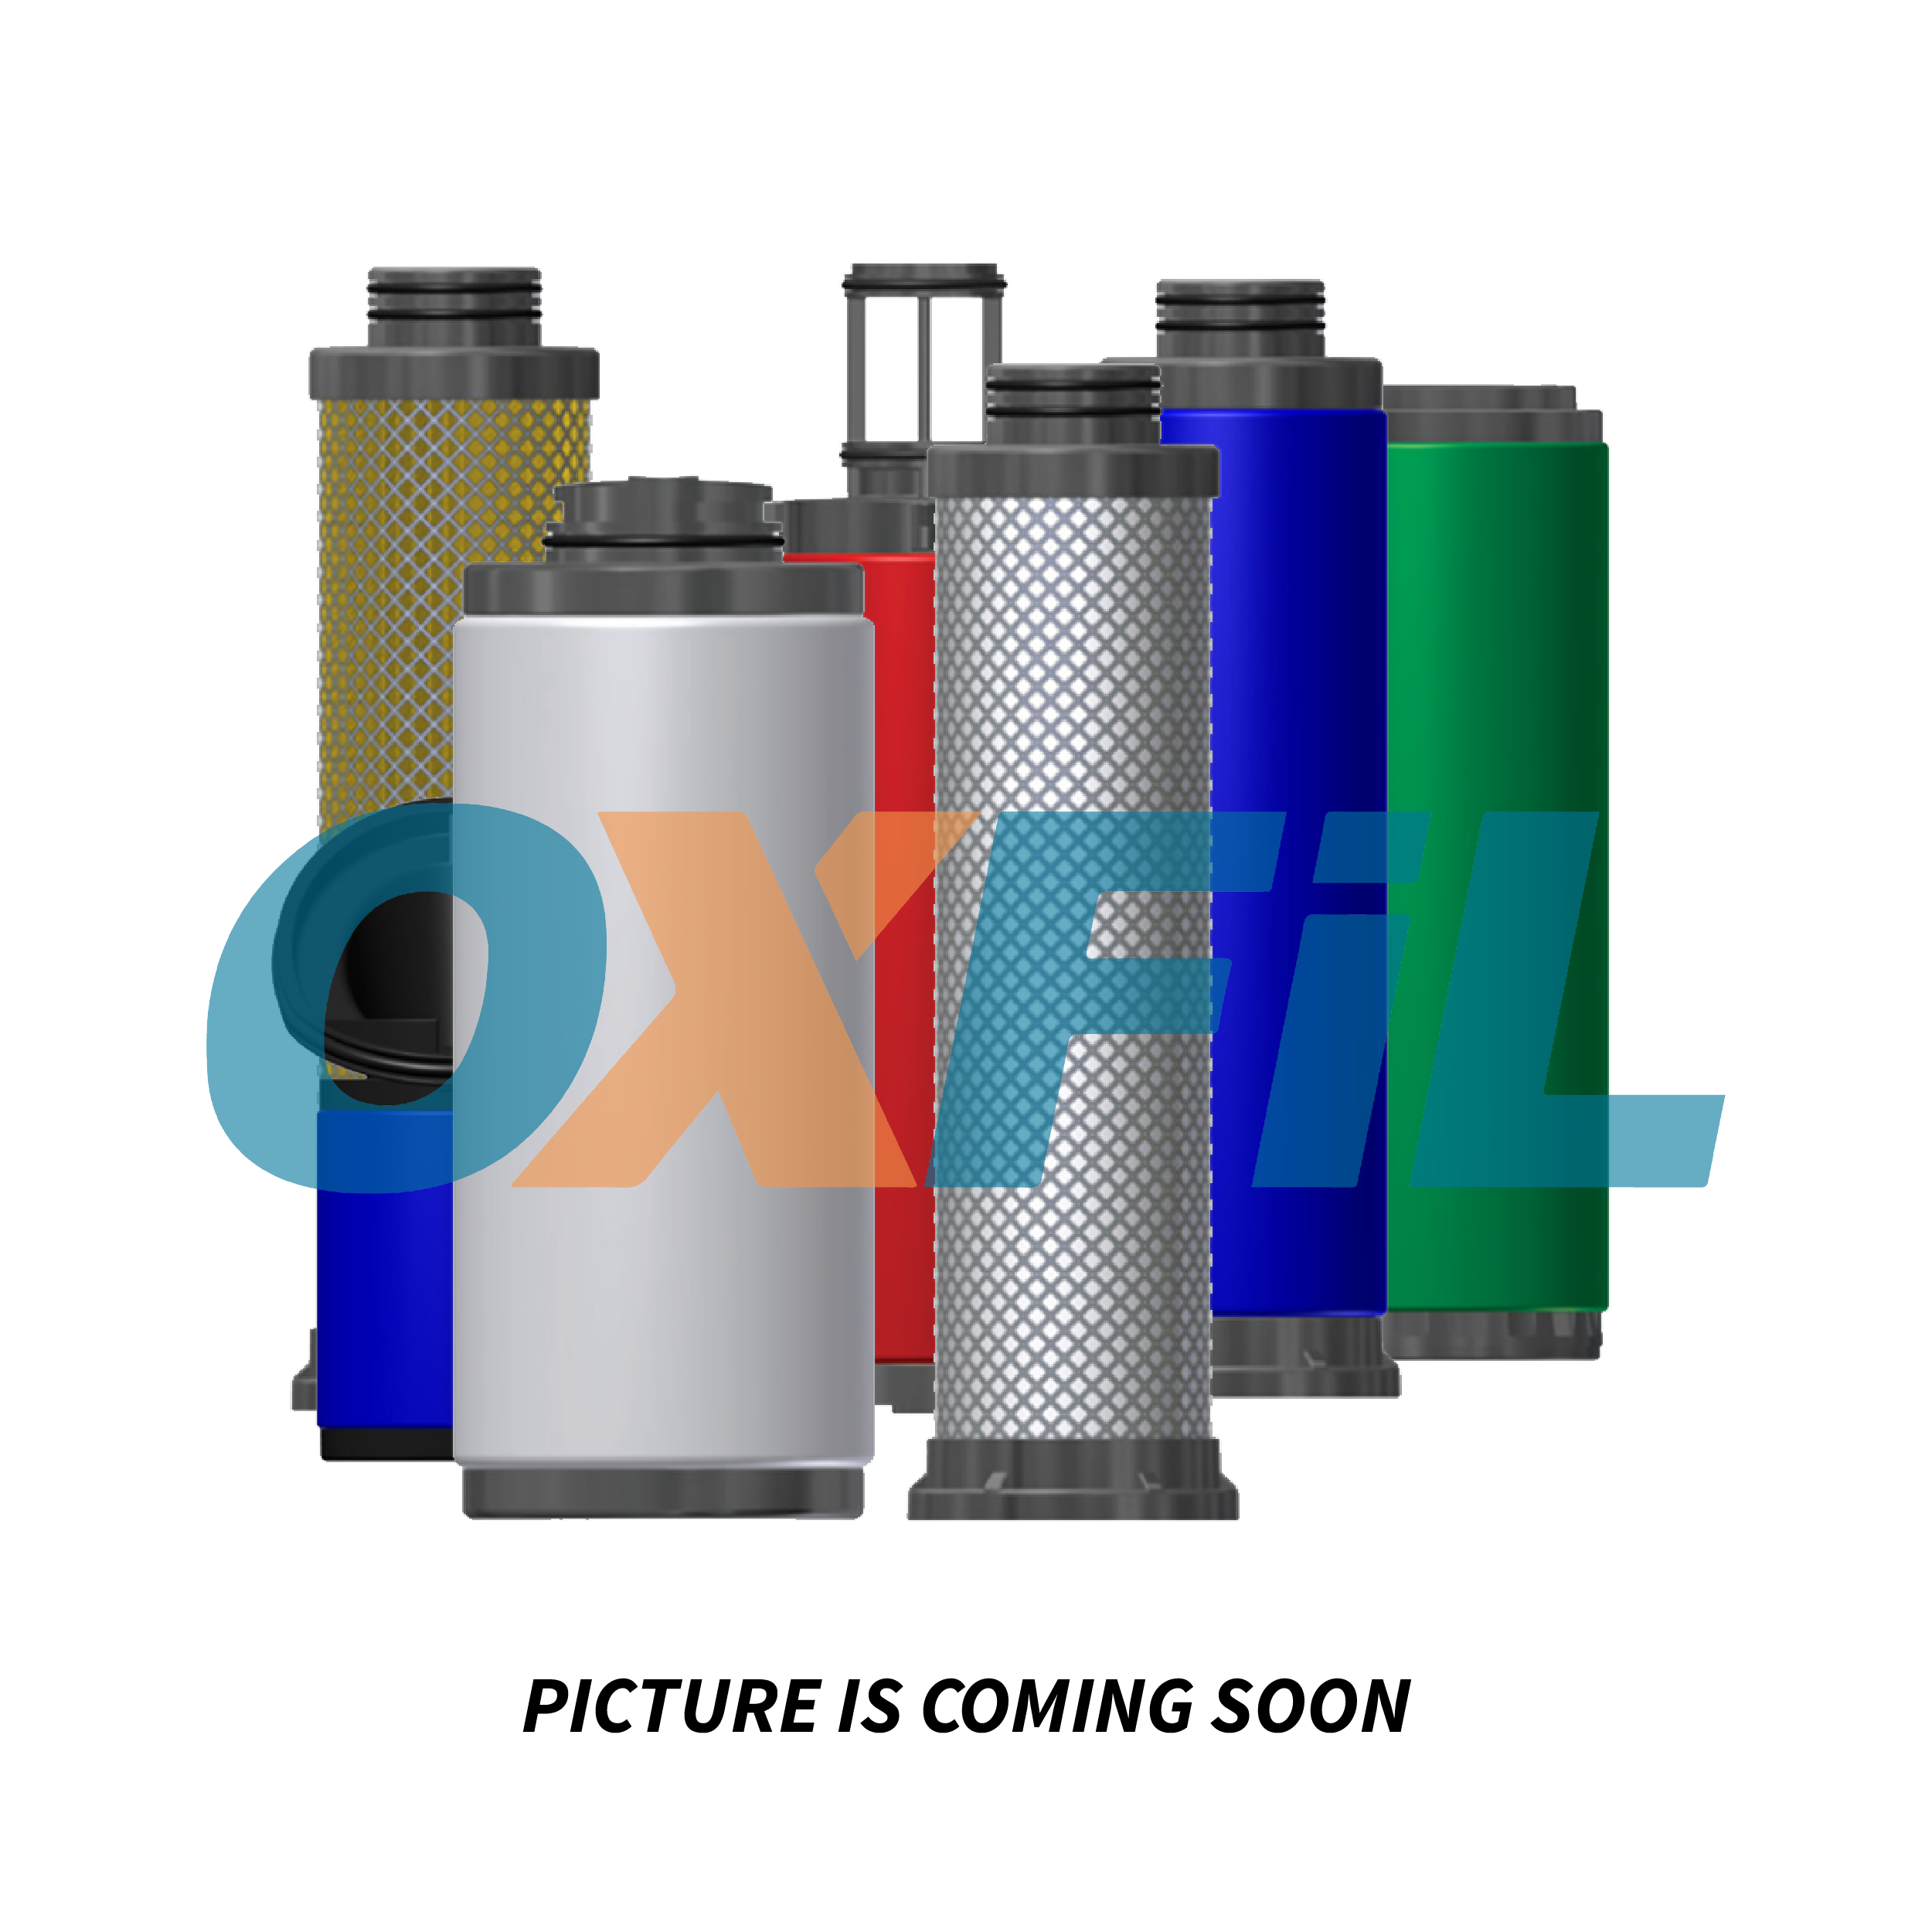 Related product IF.4397 - In-line Filter